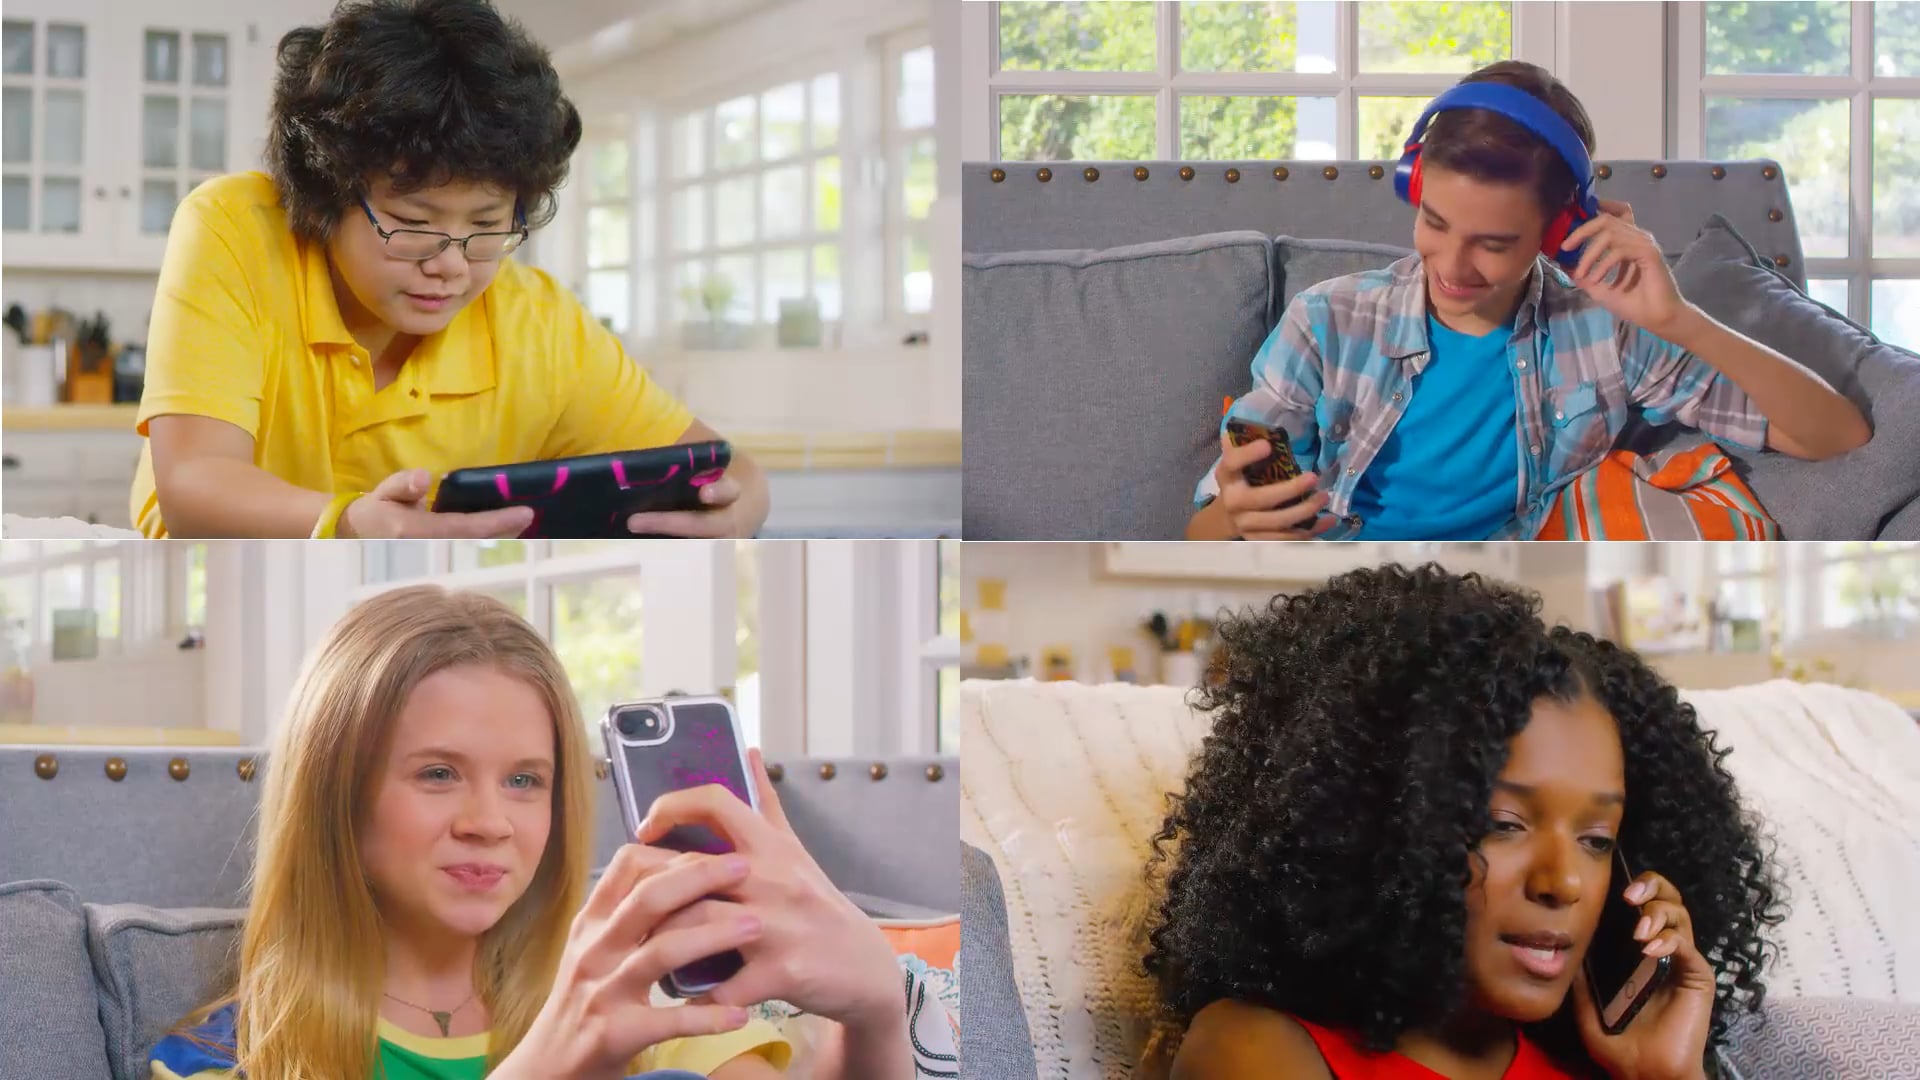 "WIFI For Everyone" Commercial